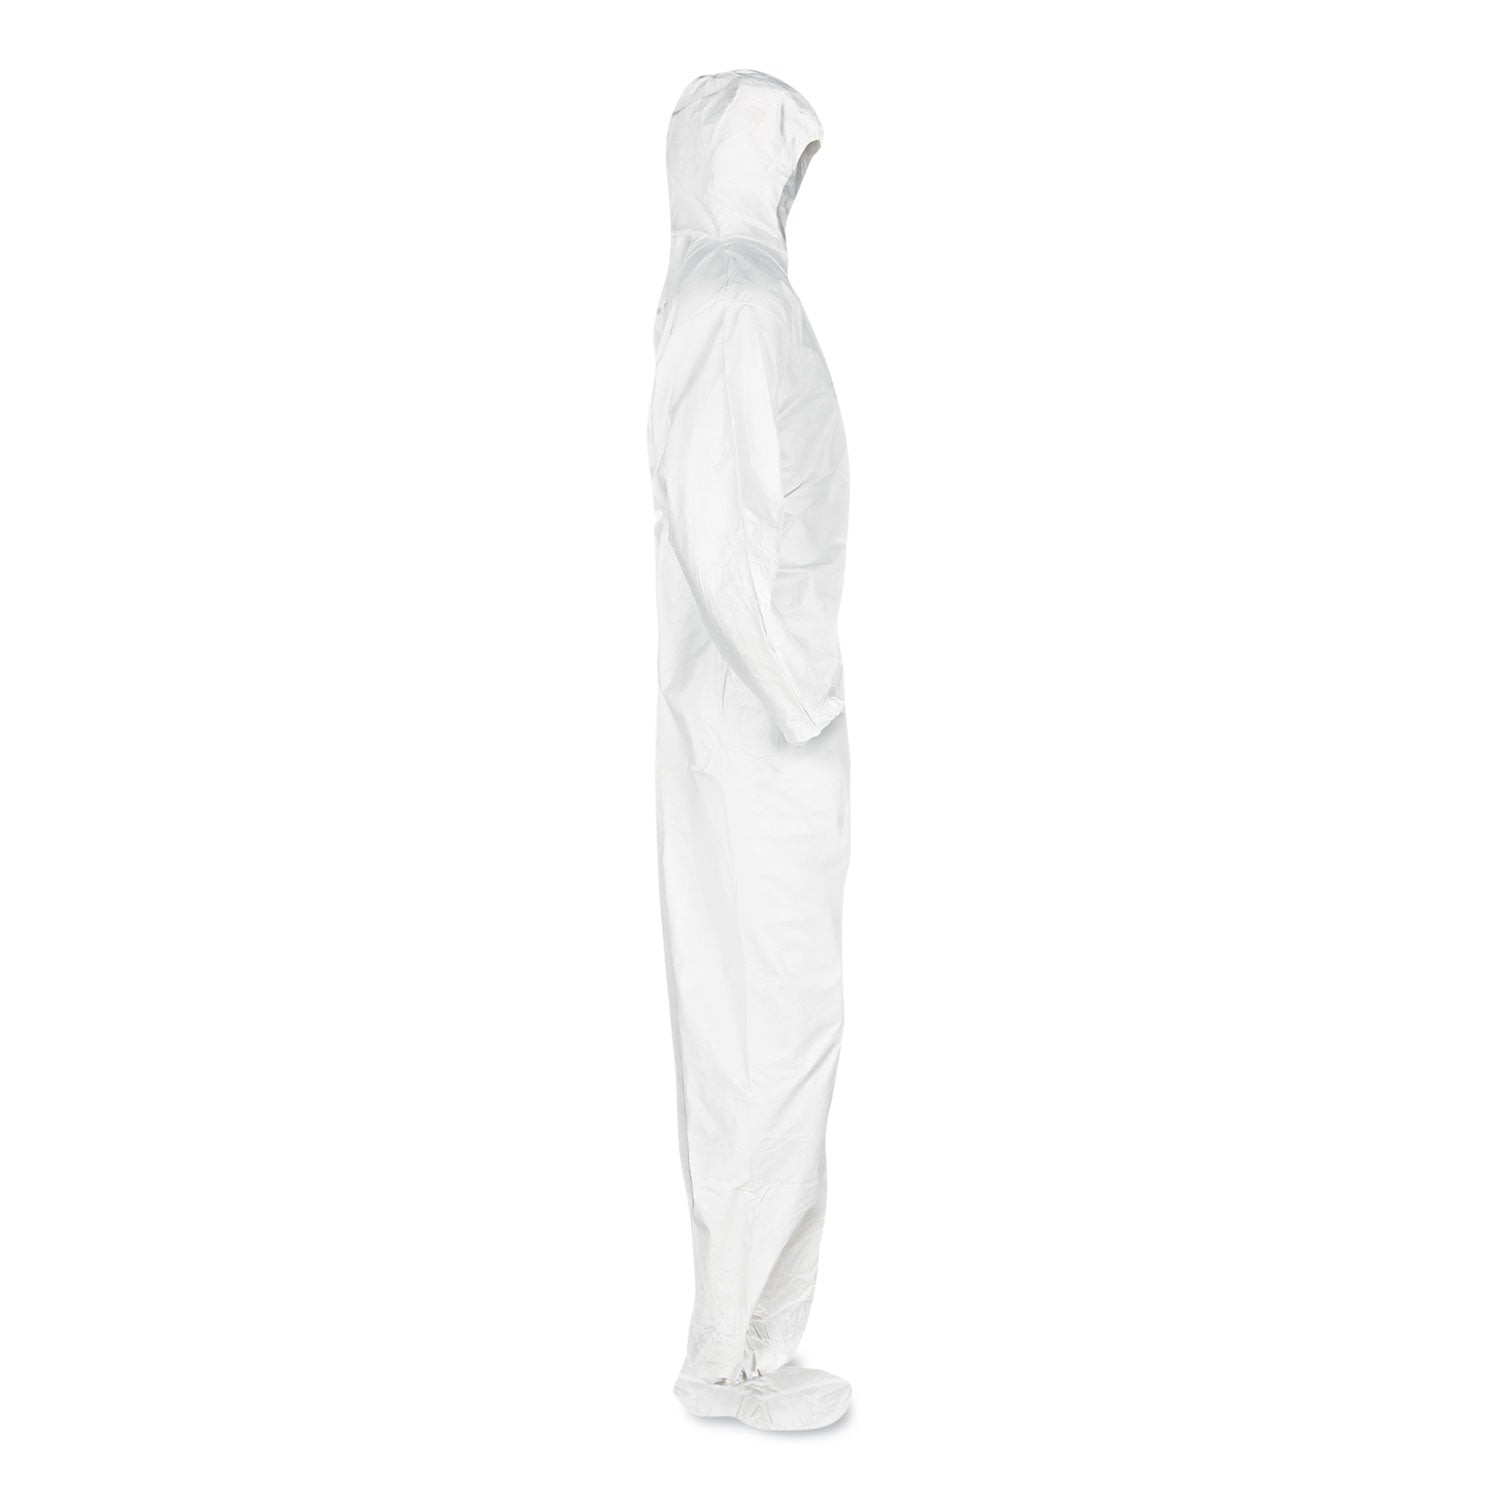 a20-breathable-particle-protection-coveralls-elastic-back-hood-and-boots-large-white-24-carton_kcc49123 - 3